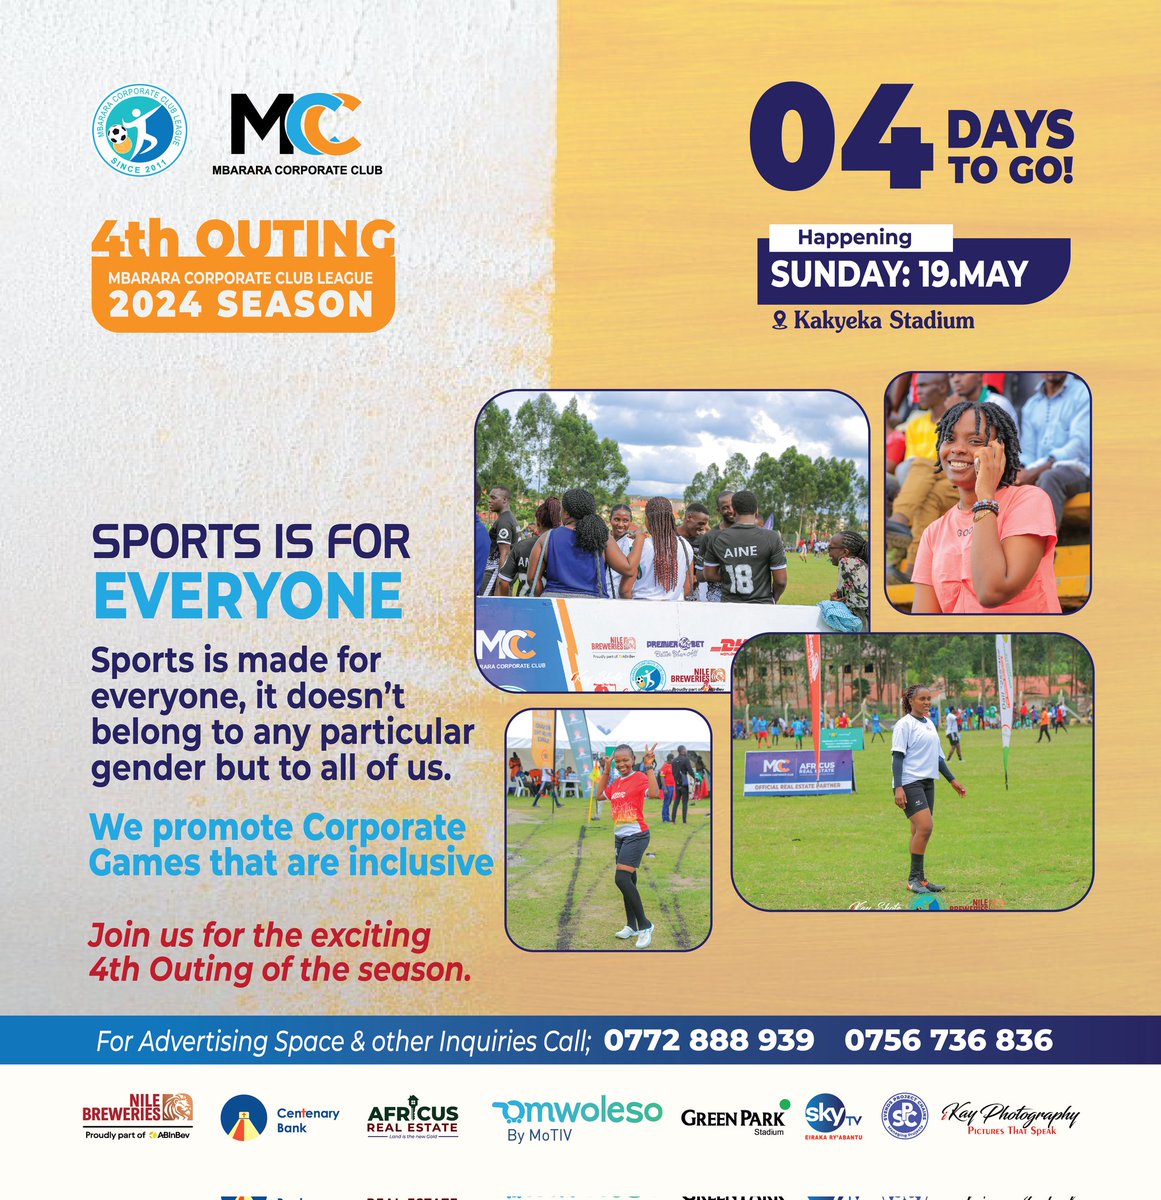 #4THOUTING_COUNTDOWN
We are remaining with only 4 days.

SPORTS IS FOR EVERYONE.
Sports is made for everyone, it doesn’t belong to any particular gender but to all of us.
We promote Corporate Games that are inclusive.
#MCC4THOUTING
#NBLMCCSeason24